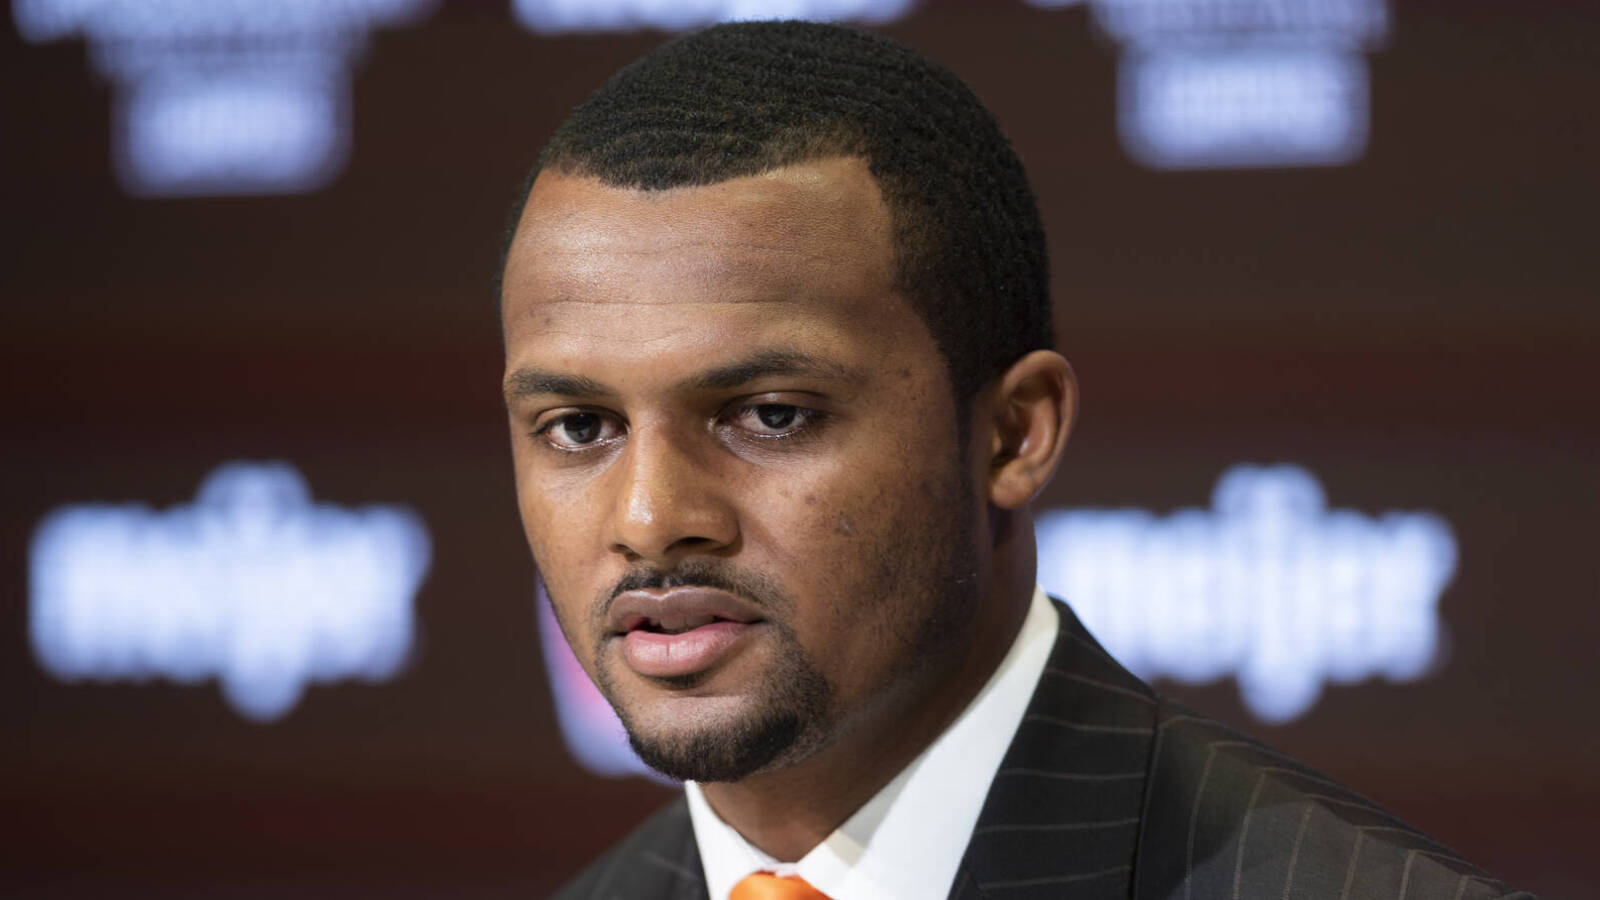 District attorney: Lack of indictment for Deshaun Watson 'not an exoneration'